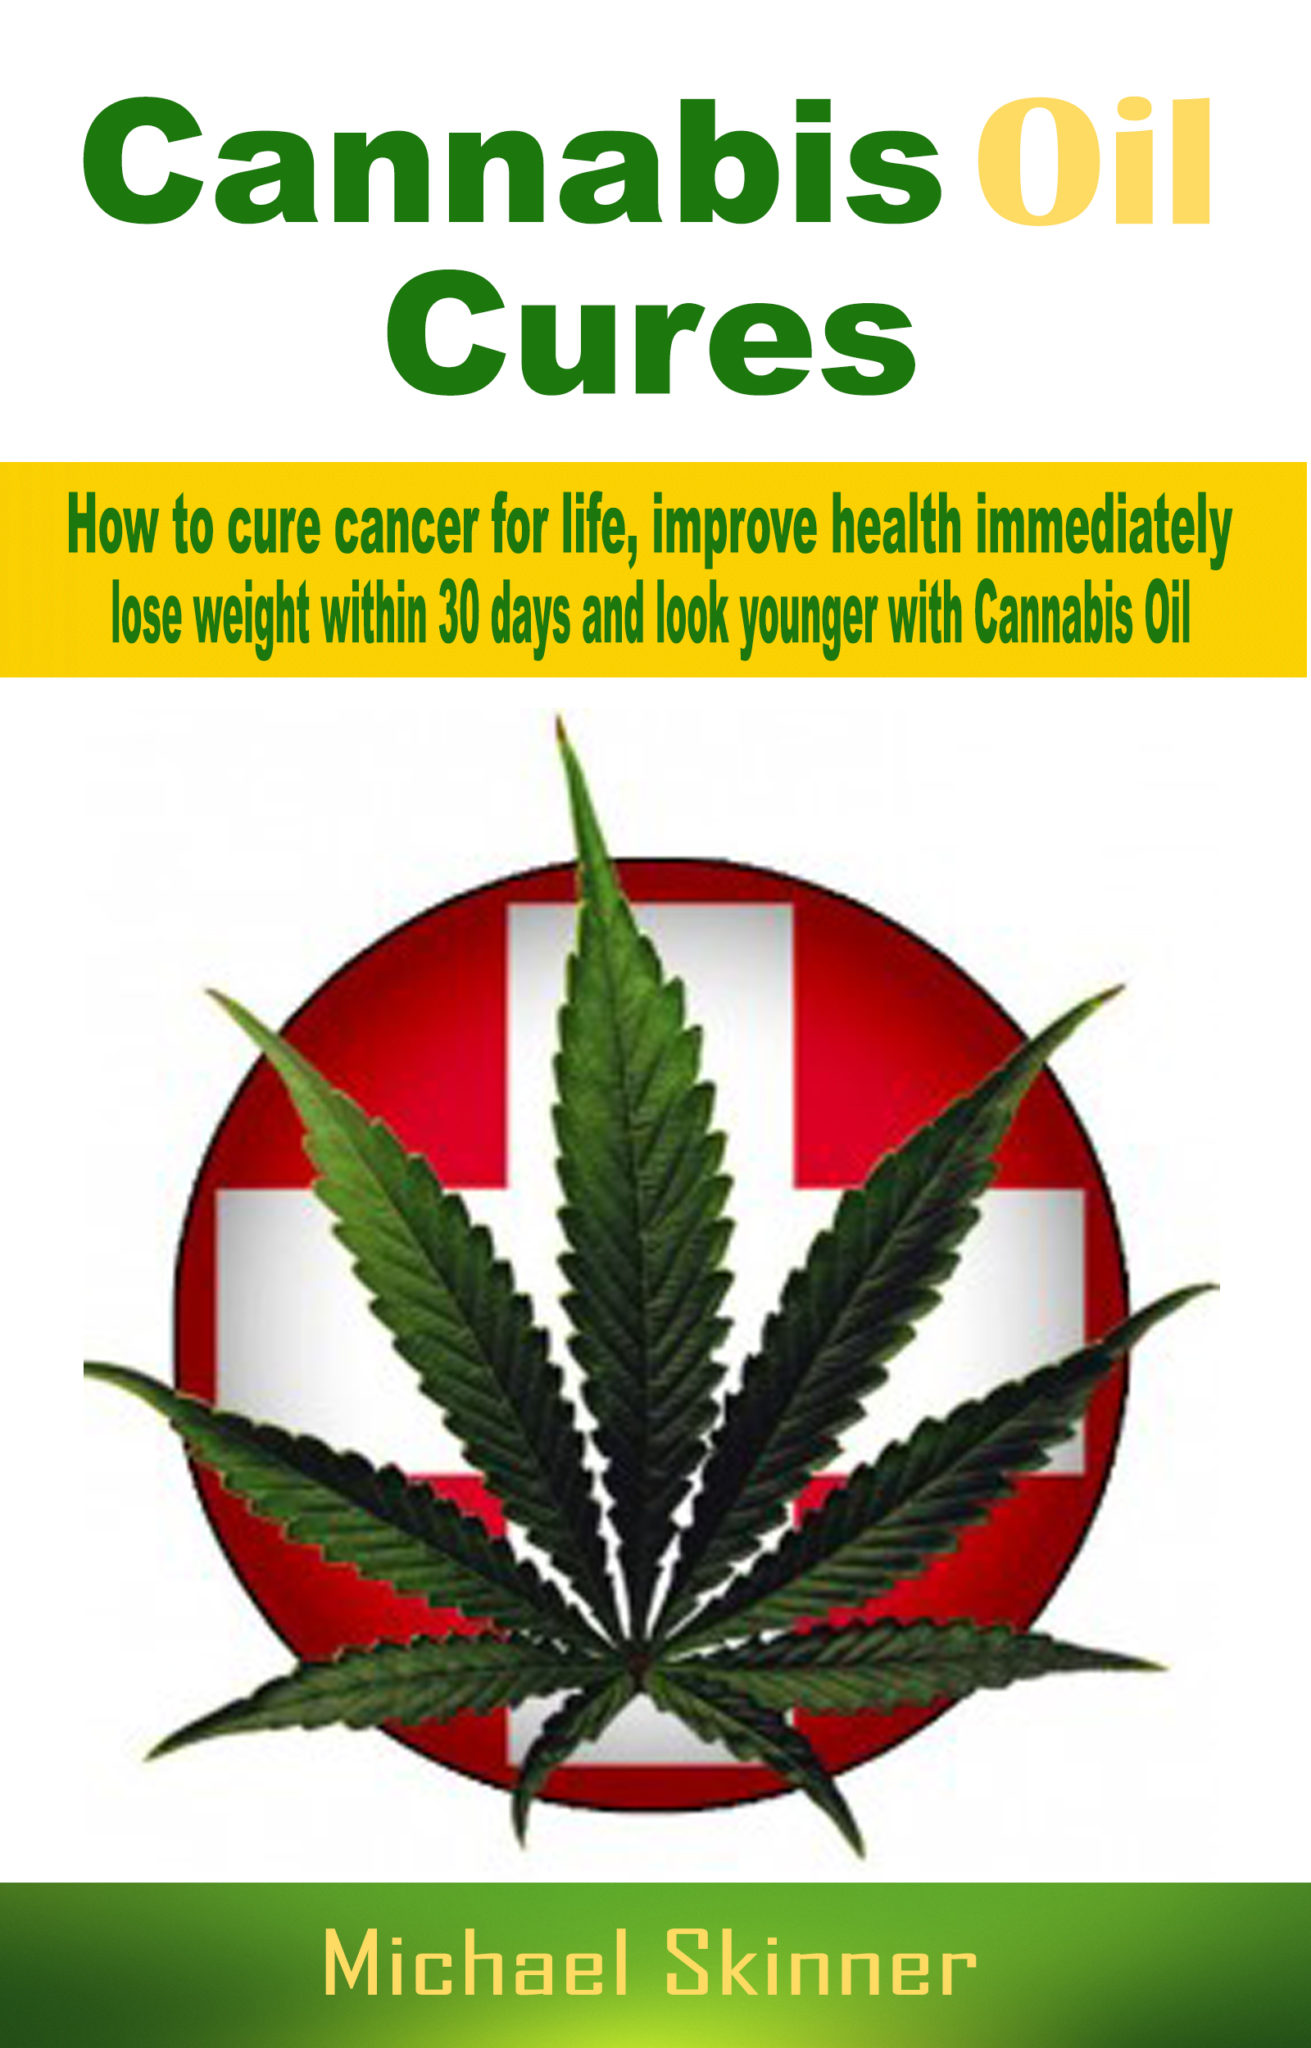 FREE: Cannabis Oil Cures by Michael Skinner